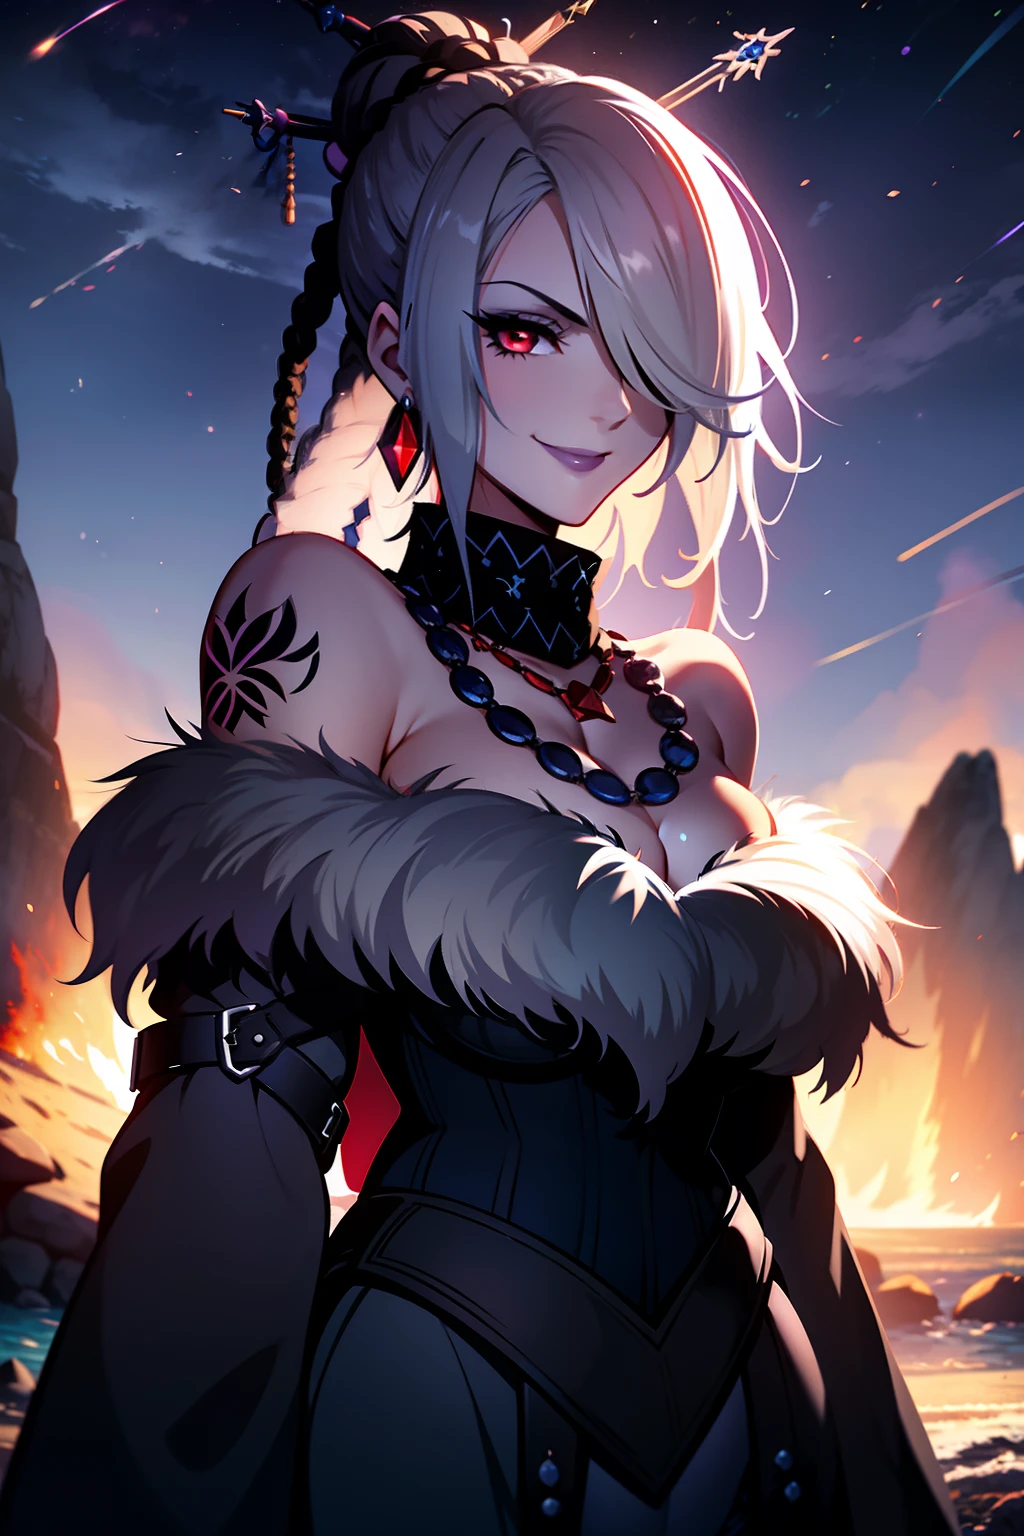 Young Woam, white hair, fur dress, tattooed arms, dark shadows, red eyes, smiling, on a beach, at night, Stars in the sky, dark blue sky, lit by a bonfire, 4k, goth style, Lulu, End fantasy